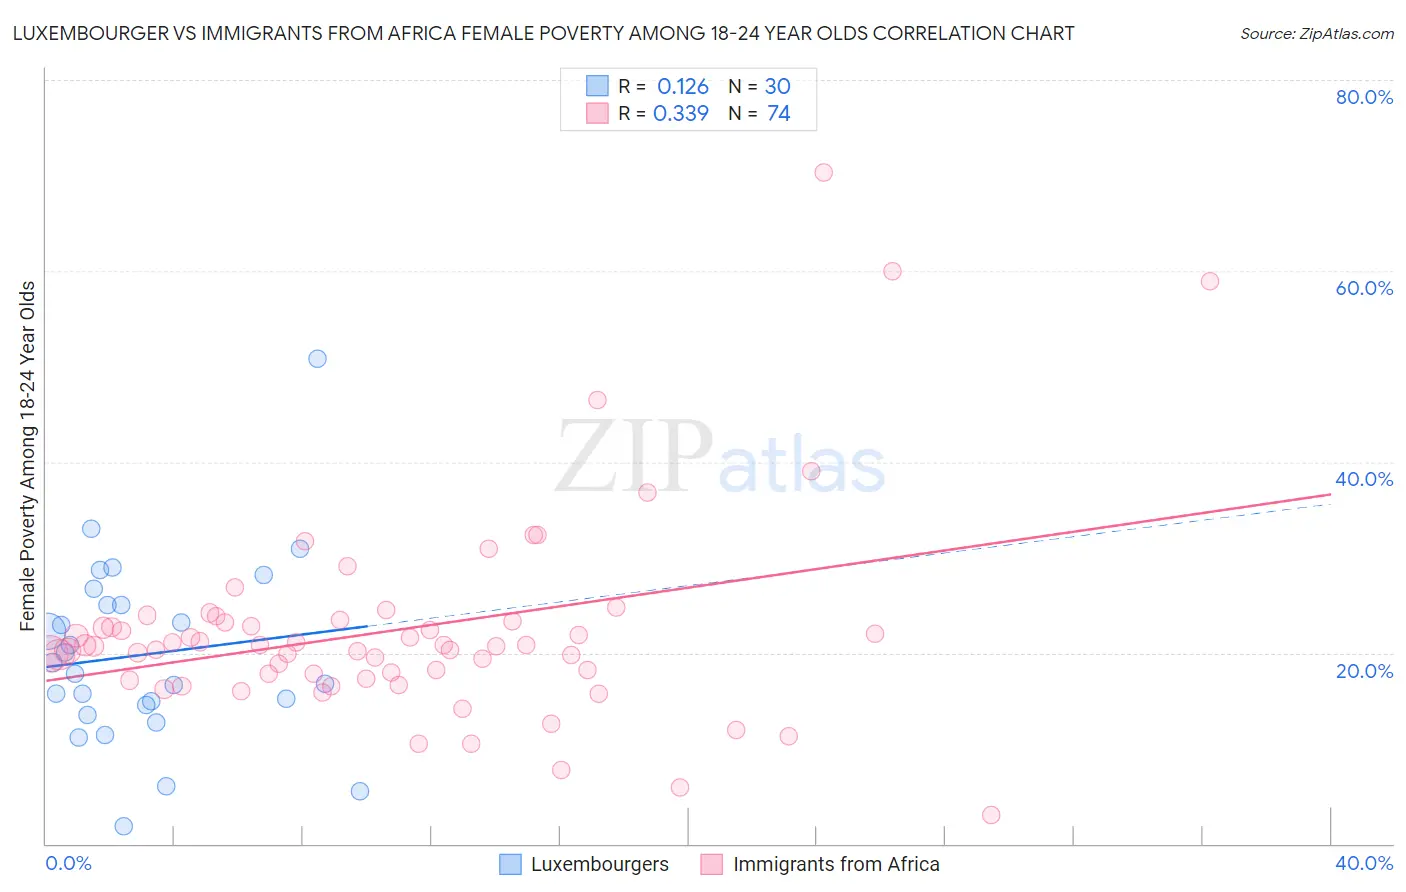 Luxembourger vs Immigrants from Africa Female Poverty Among 18-24 Year Olds